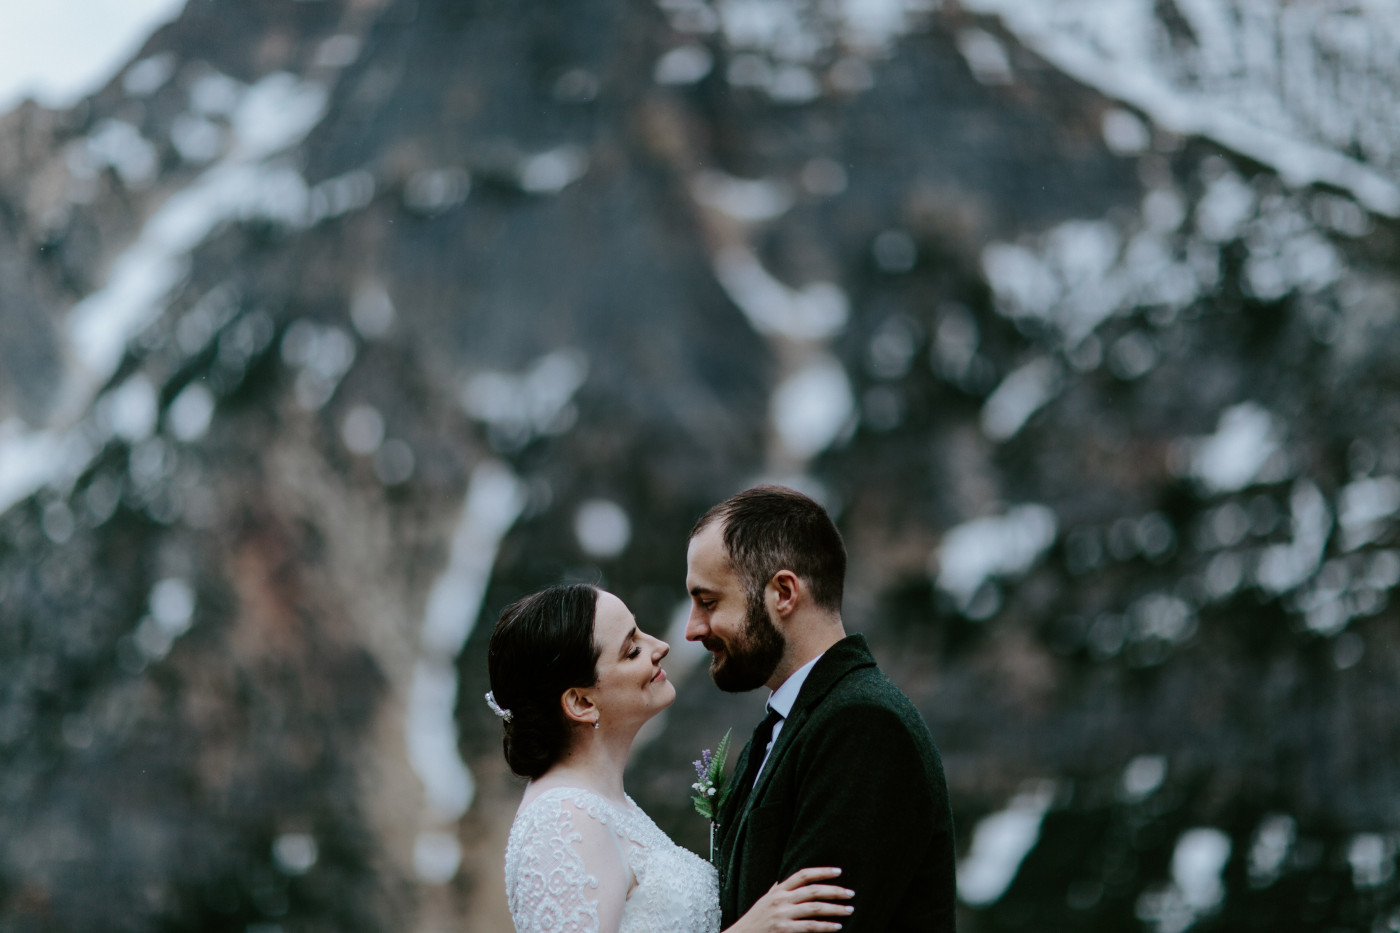 Alex and Elizabeth stand together at the North Cascades. Elopement photography at North Cascades National Park by Sienna Plus Josh.